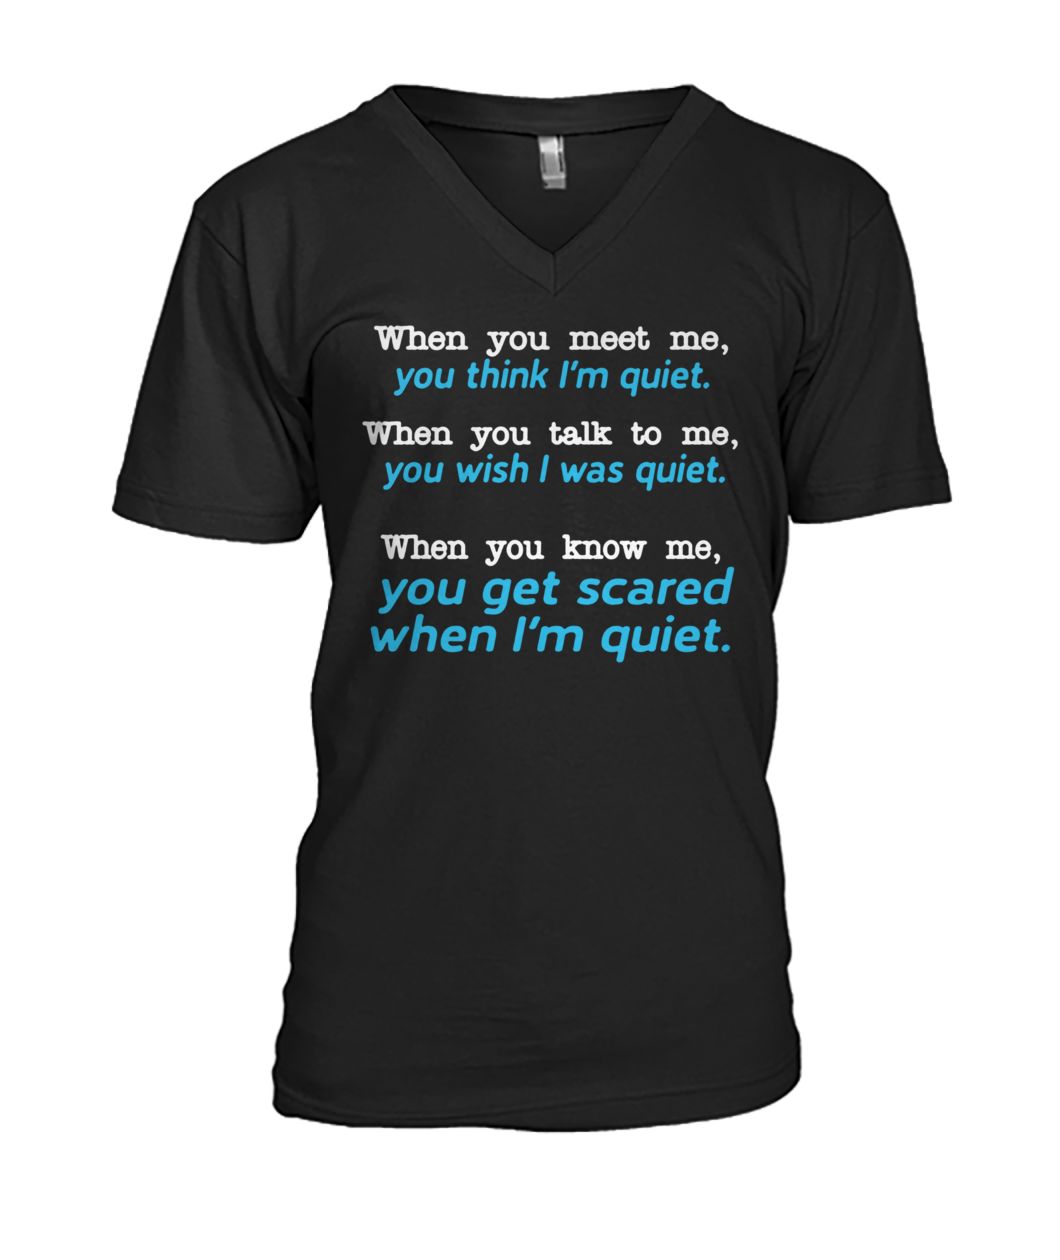 When you meet me think I'm quiet when you talk to me you wish I was quiet men's v-neck